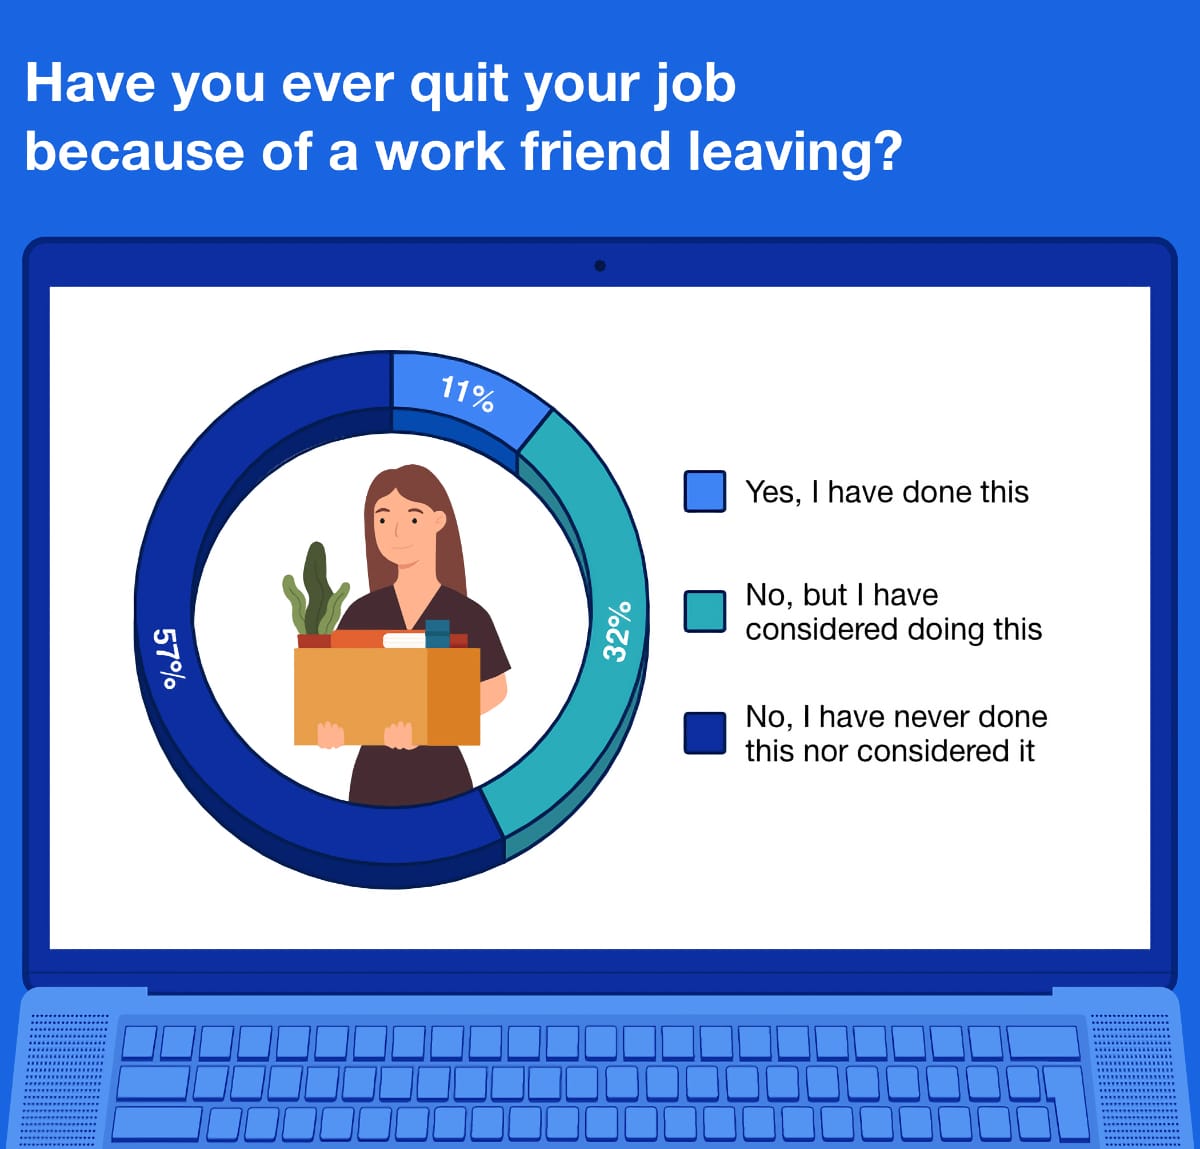 Infographic: Have you ever quit your job because of a work friend leaving